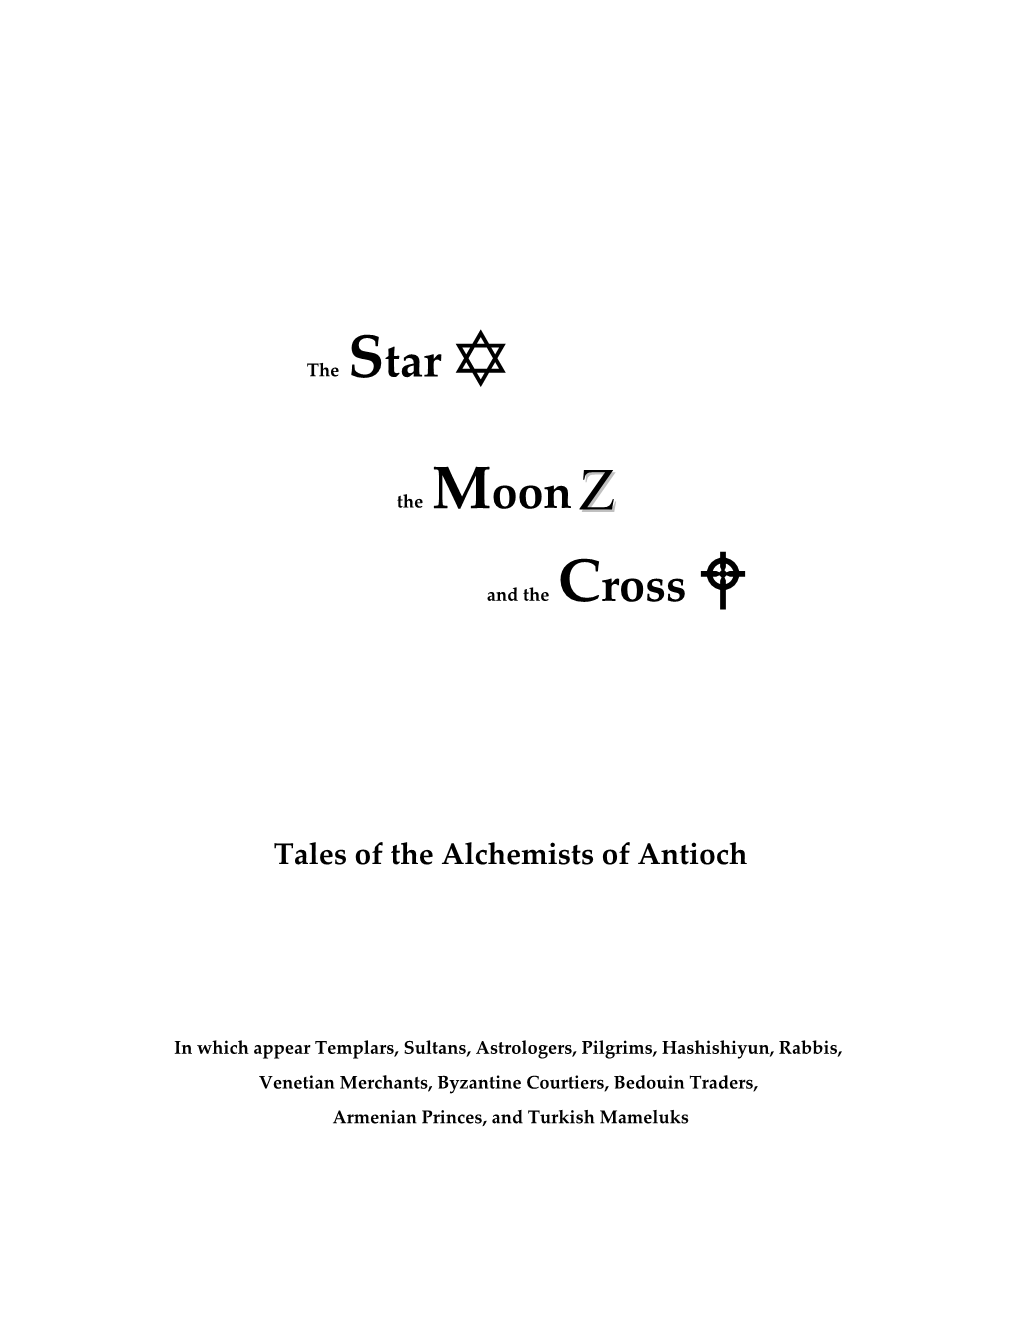 The Star , the Moon , and the Cross